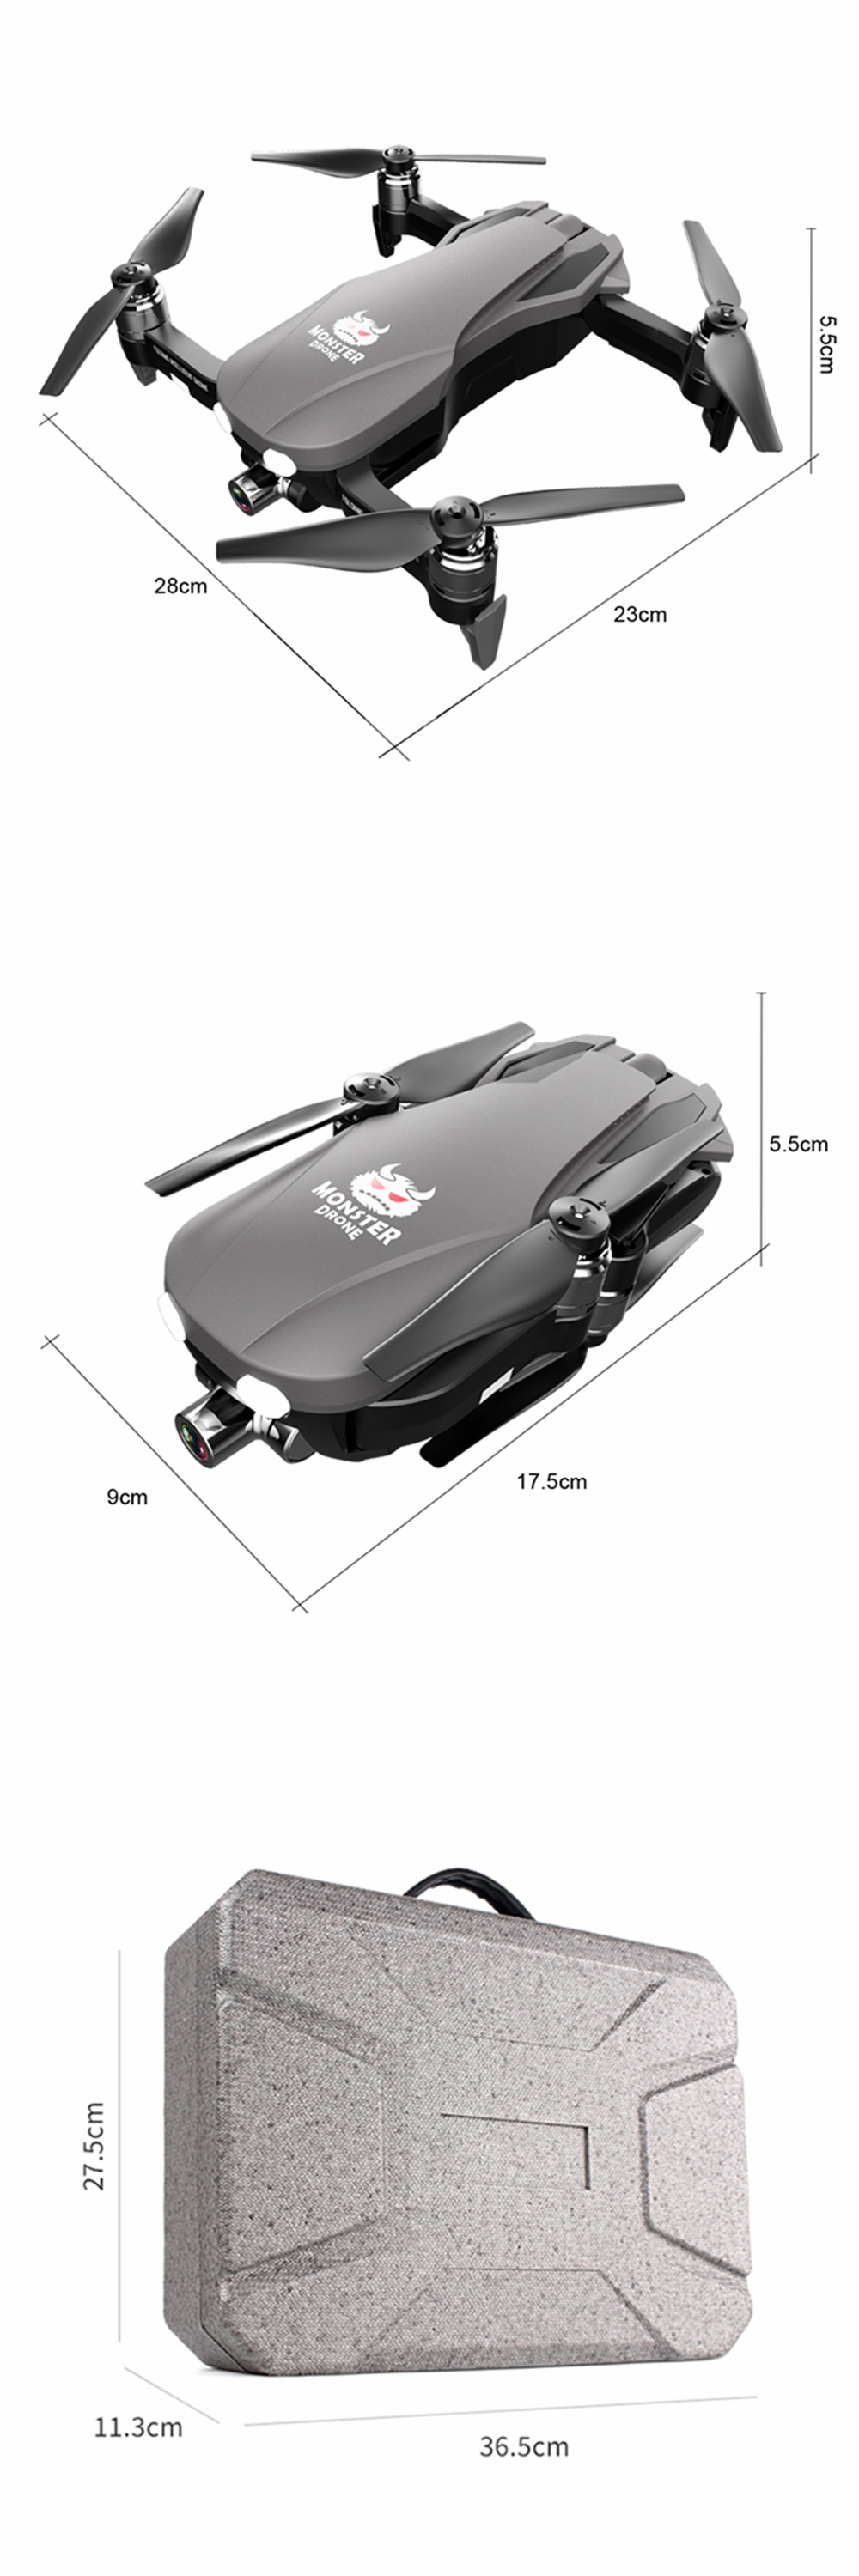 FQ777 F8 GPS 5G WiFi FPV w/ 4K HD Camera 2-axis Gimbal Brushless Foldable RC Drone Quadcopter RTF 13